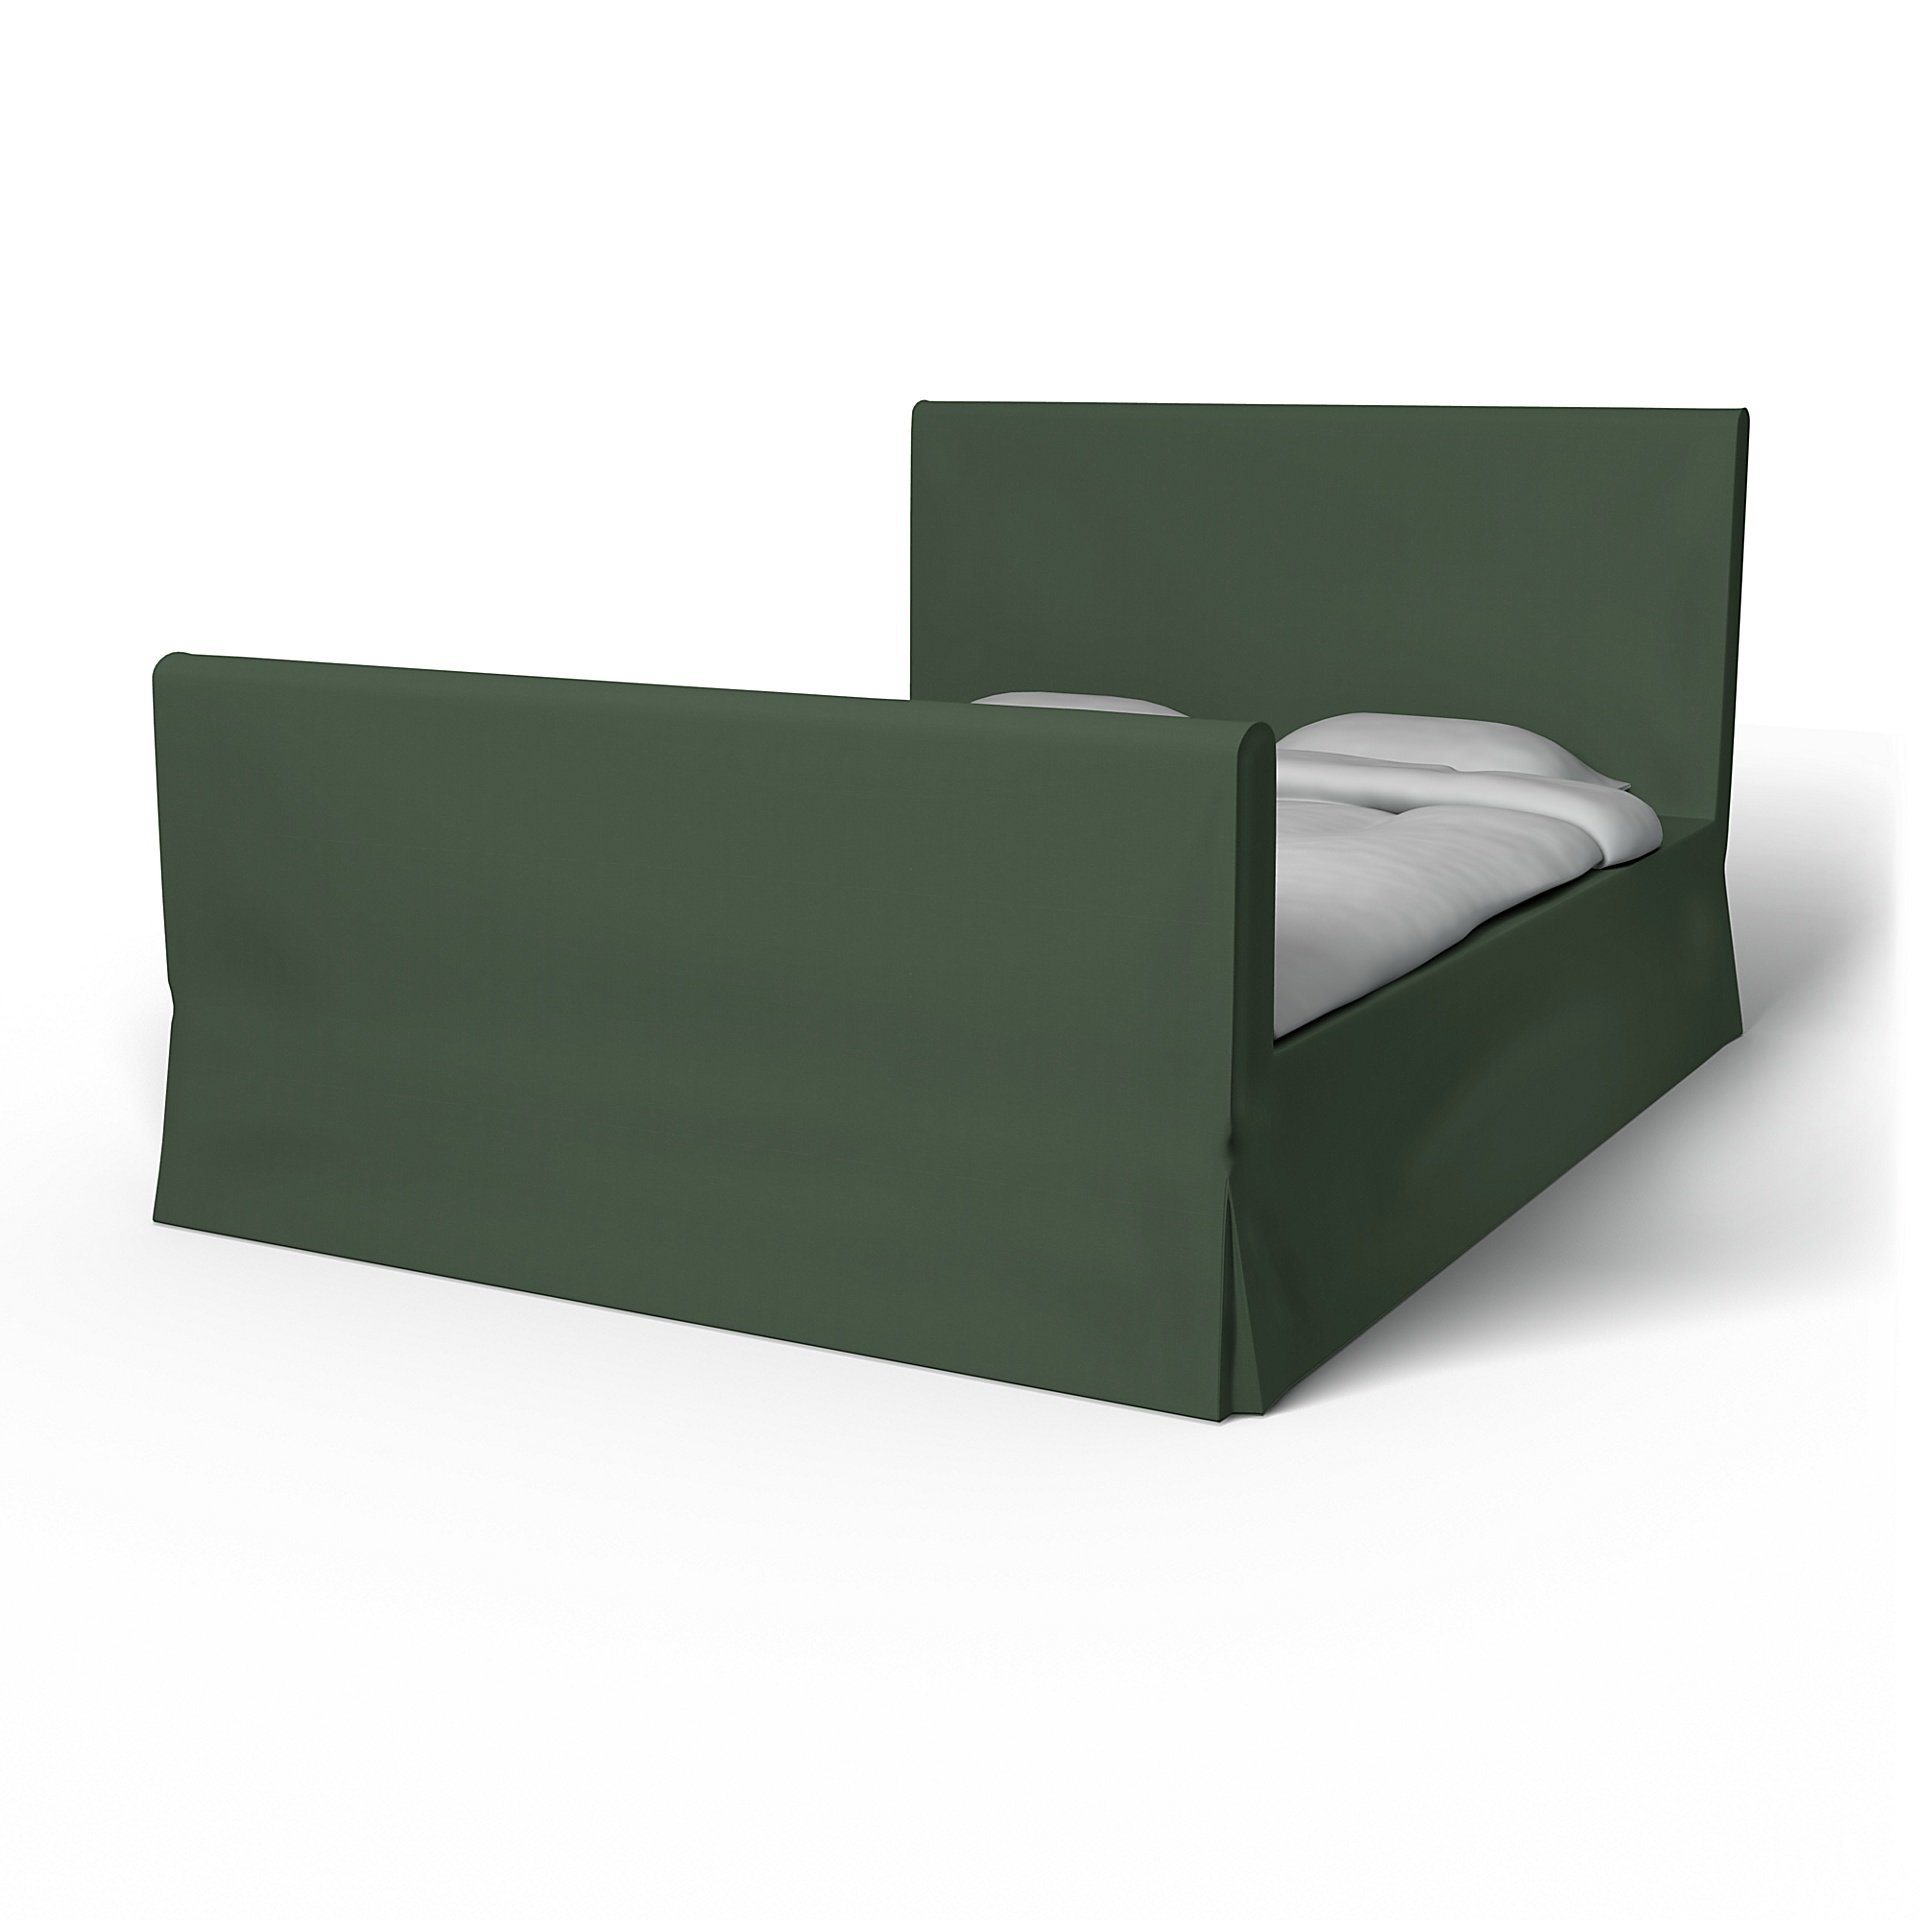 IKEA - Floro Bed Frame Cover, Thyme, Cotton - Bemz